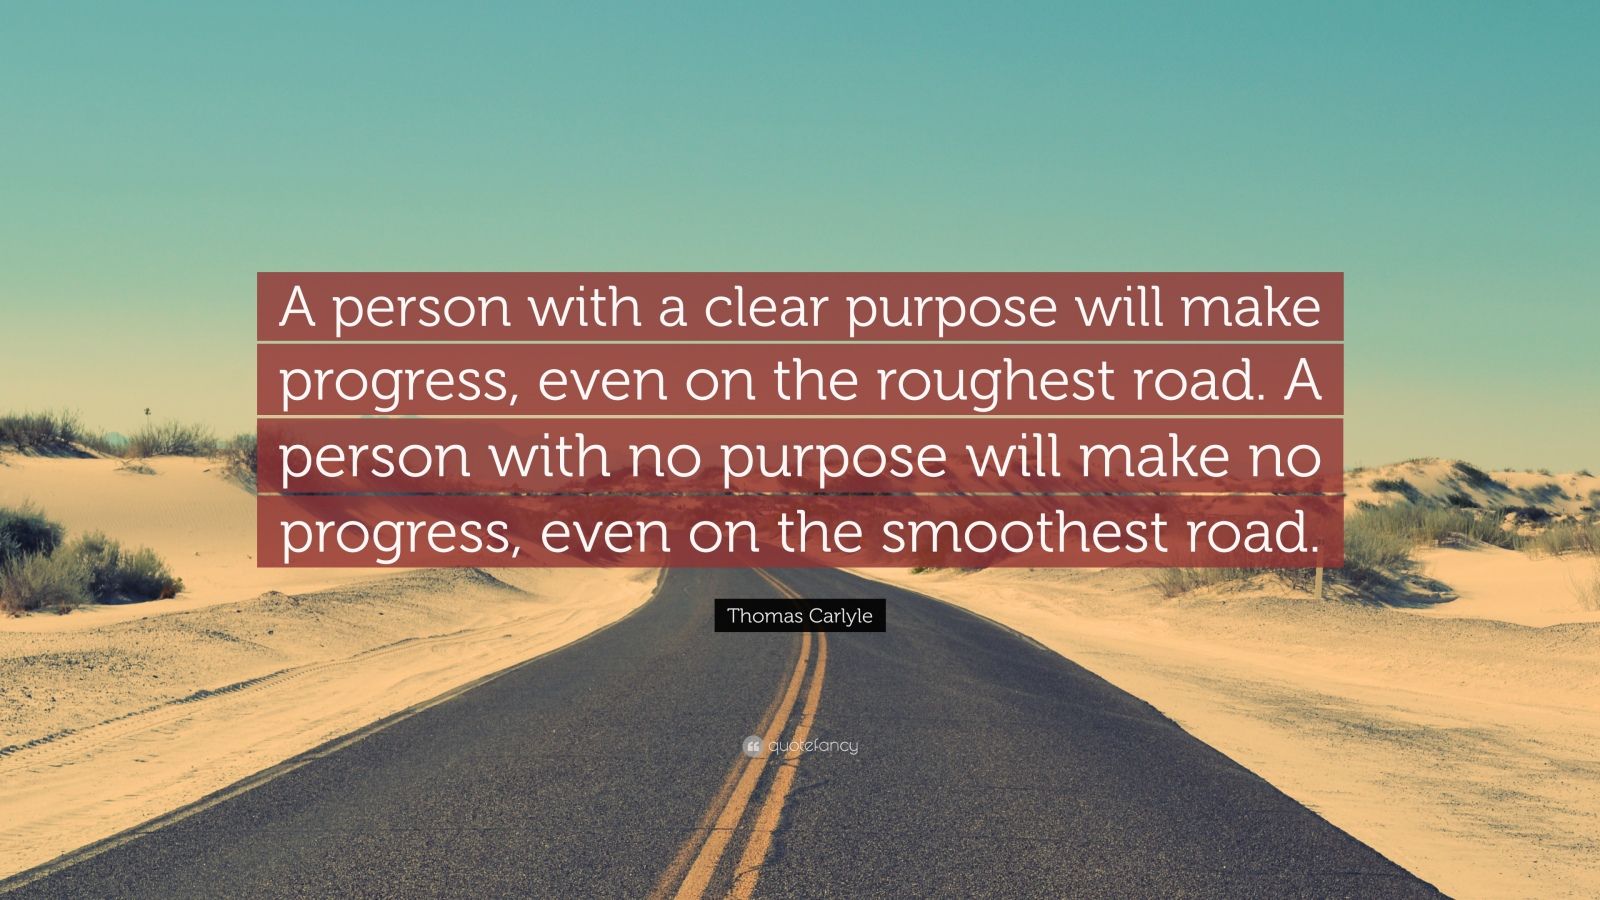 Thomas Carlyle Quote: “A person with a clear purpose will make progress ...